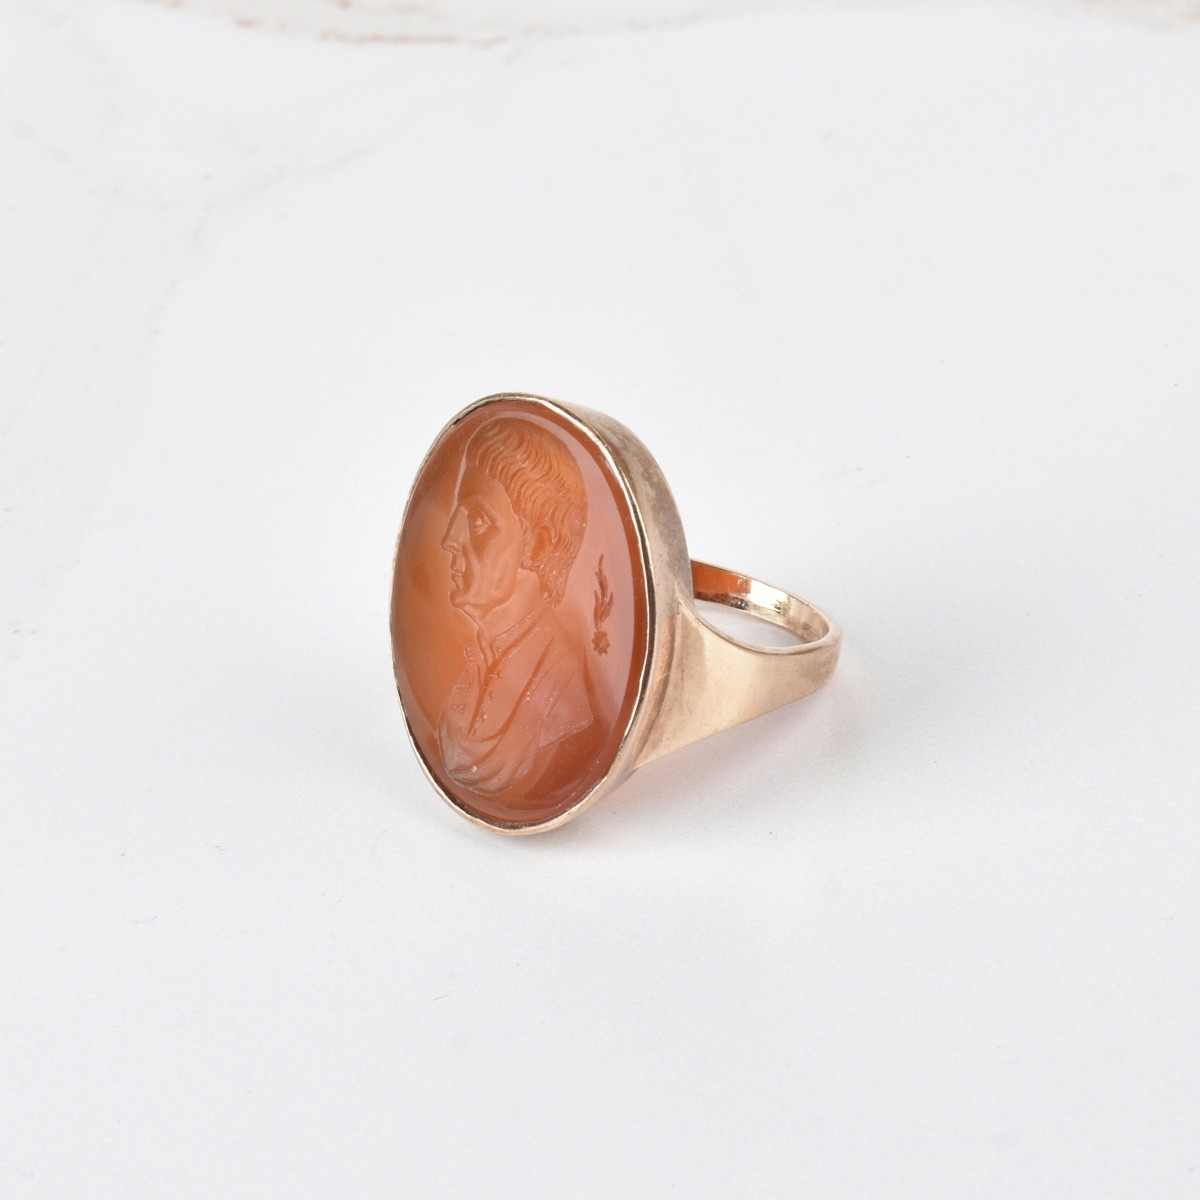 Antique Carnelian and 10K Ring